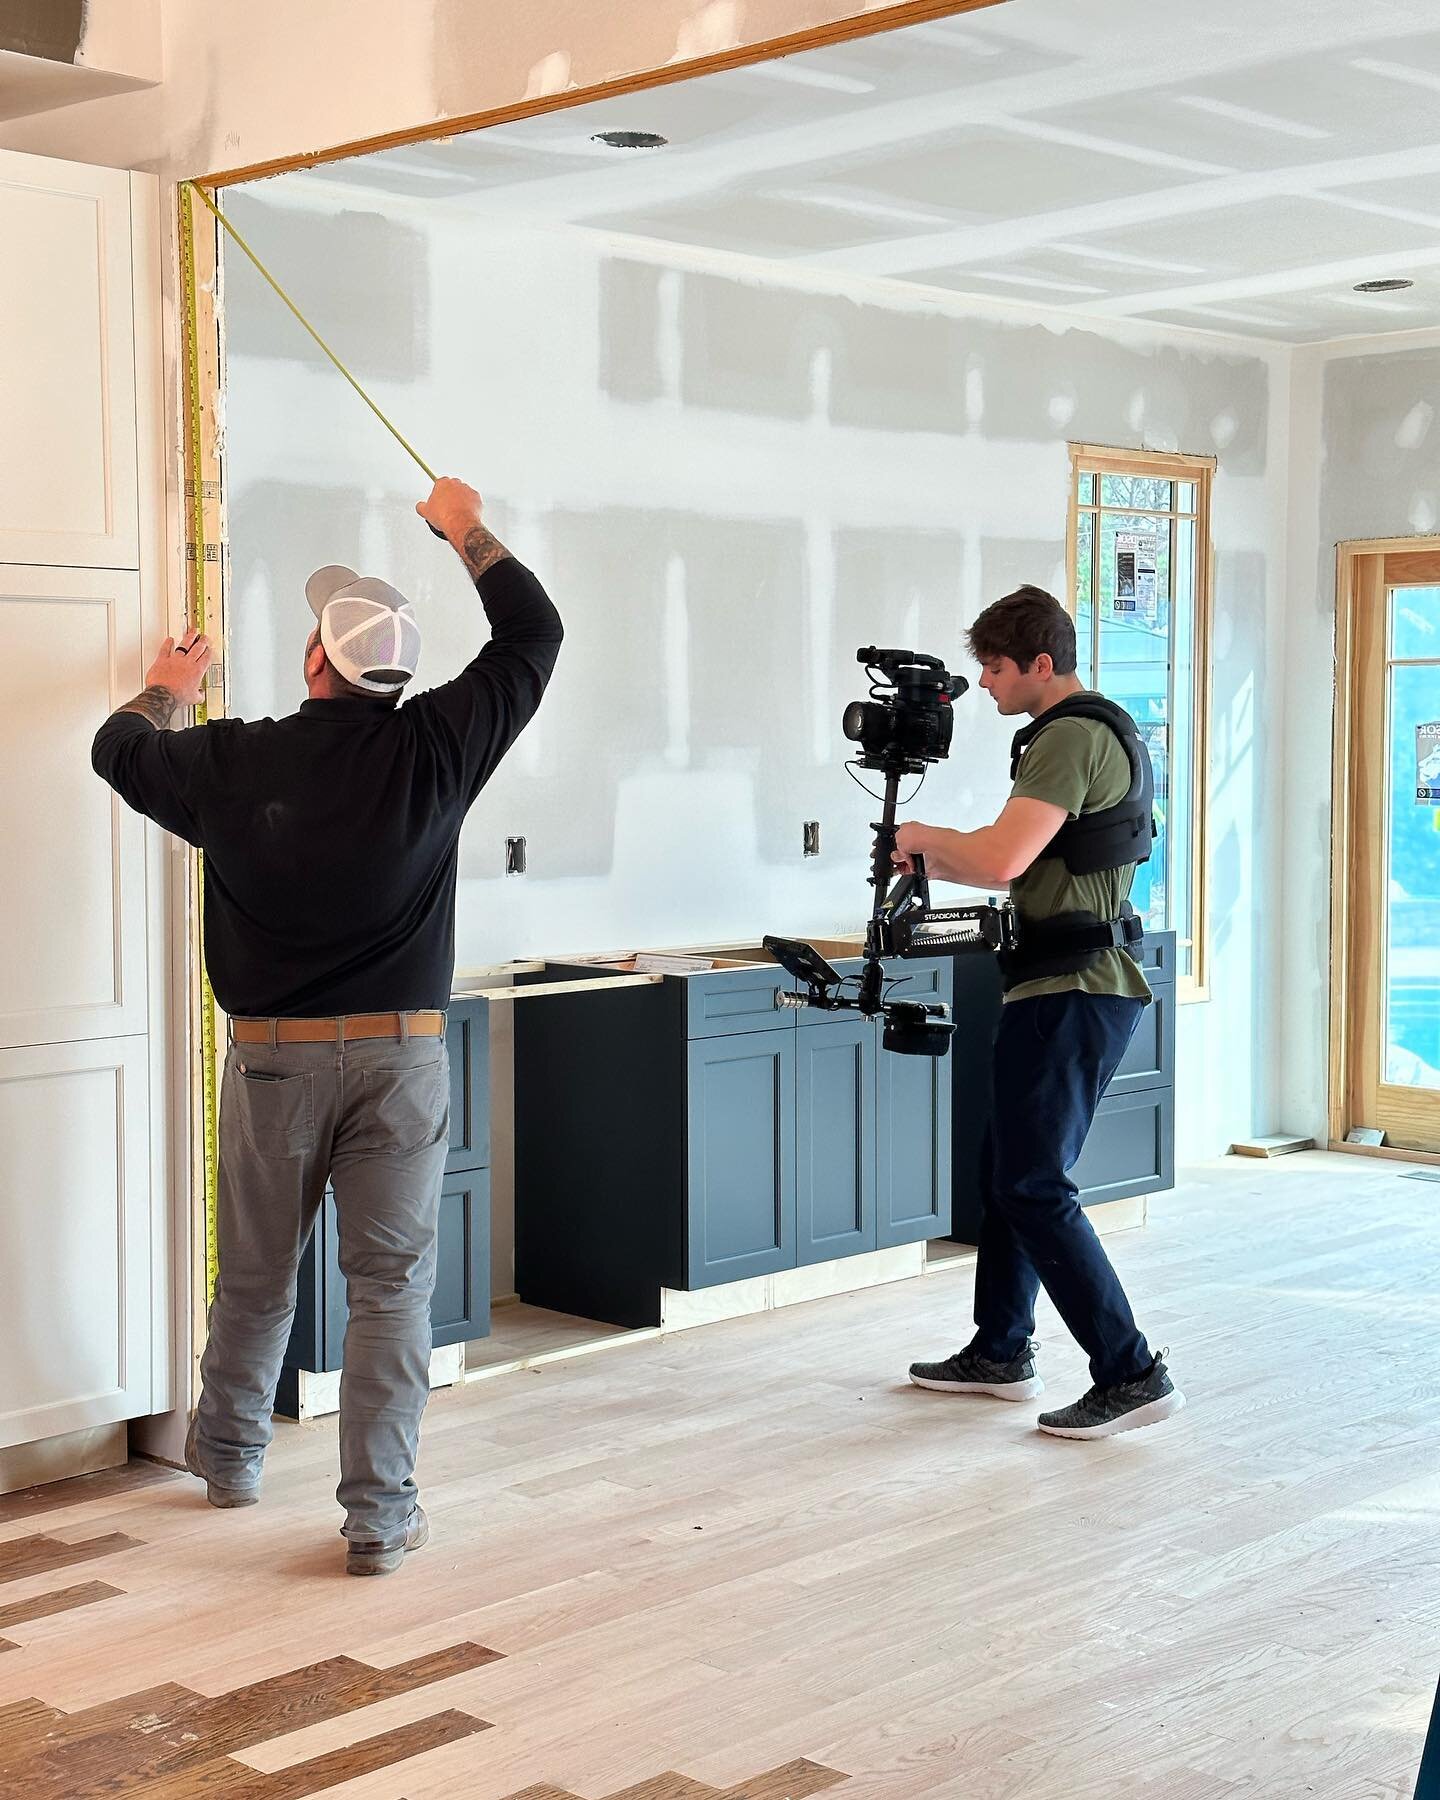 Bringing the project to life with @tingenremodeling 

Could this be the next big hit on @hgtv?? 

#videoproduction #TingenRemodeling #Steadicam #CanonC200